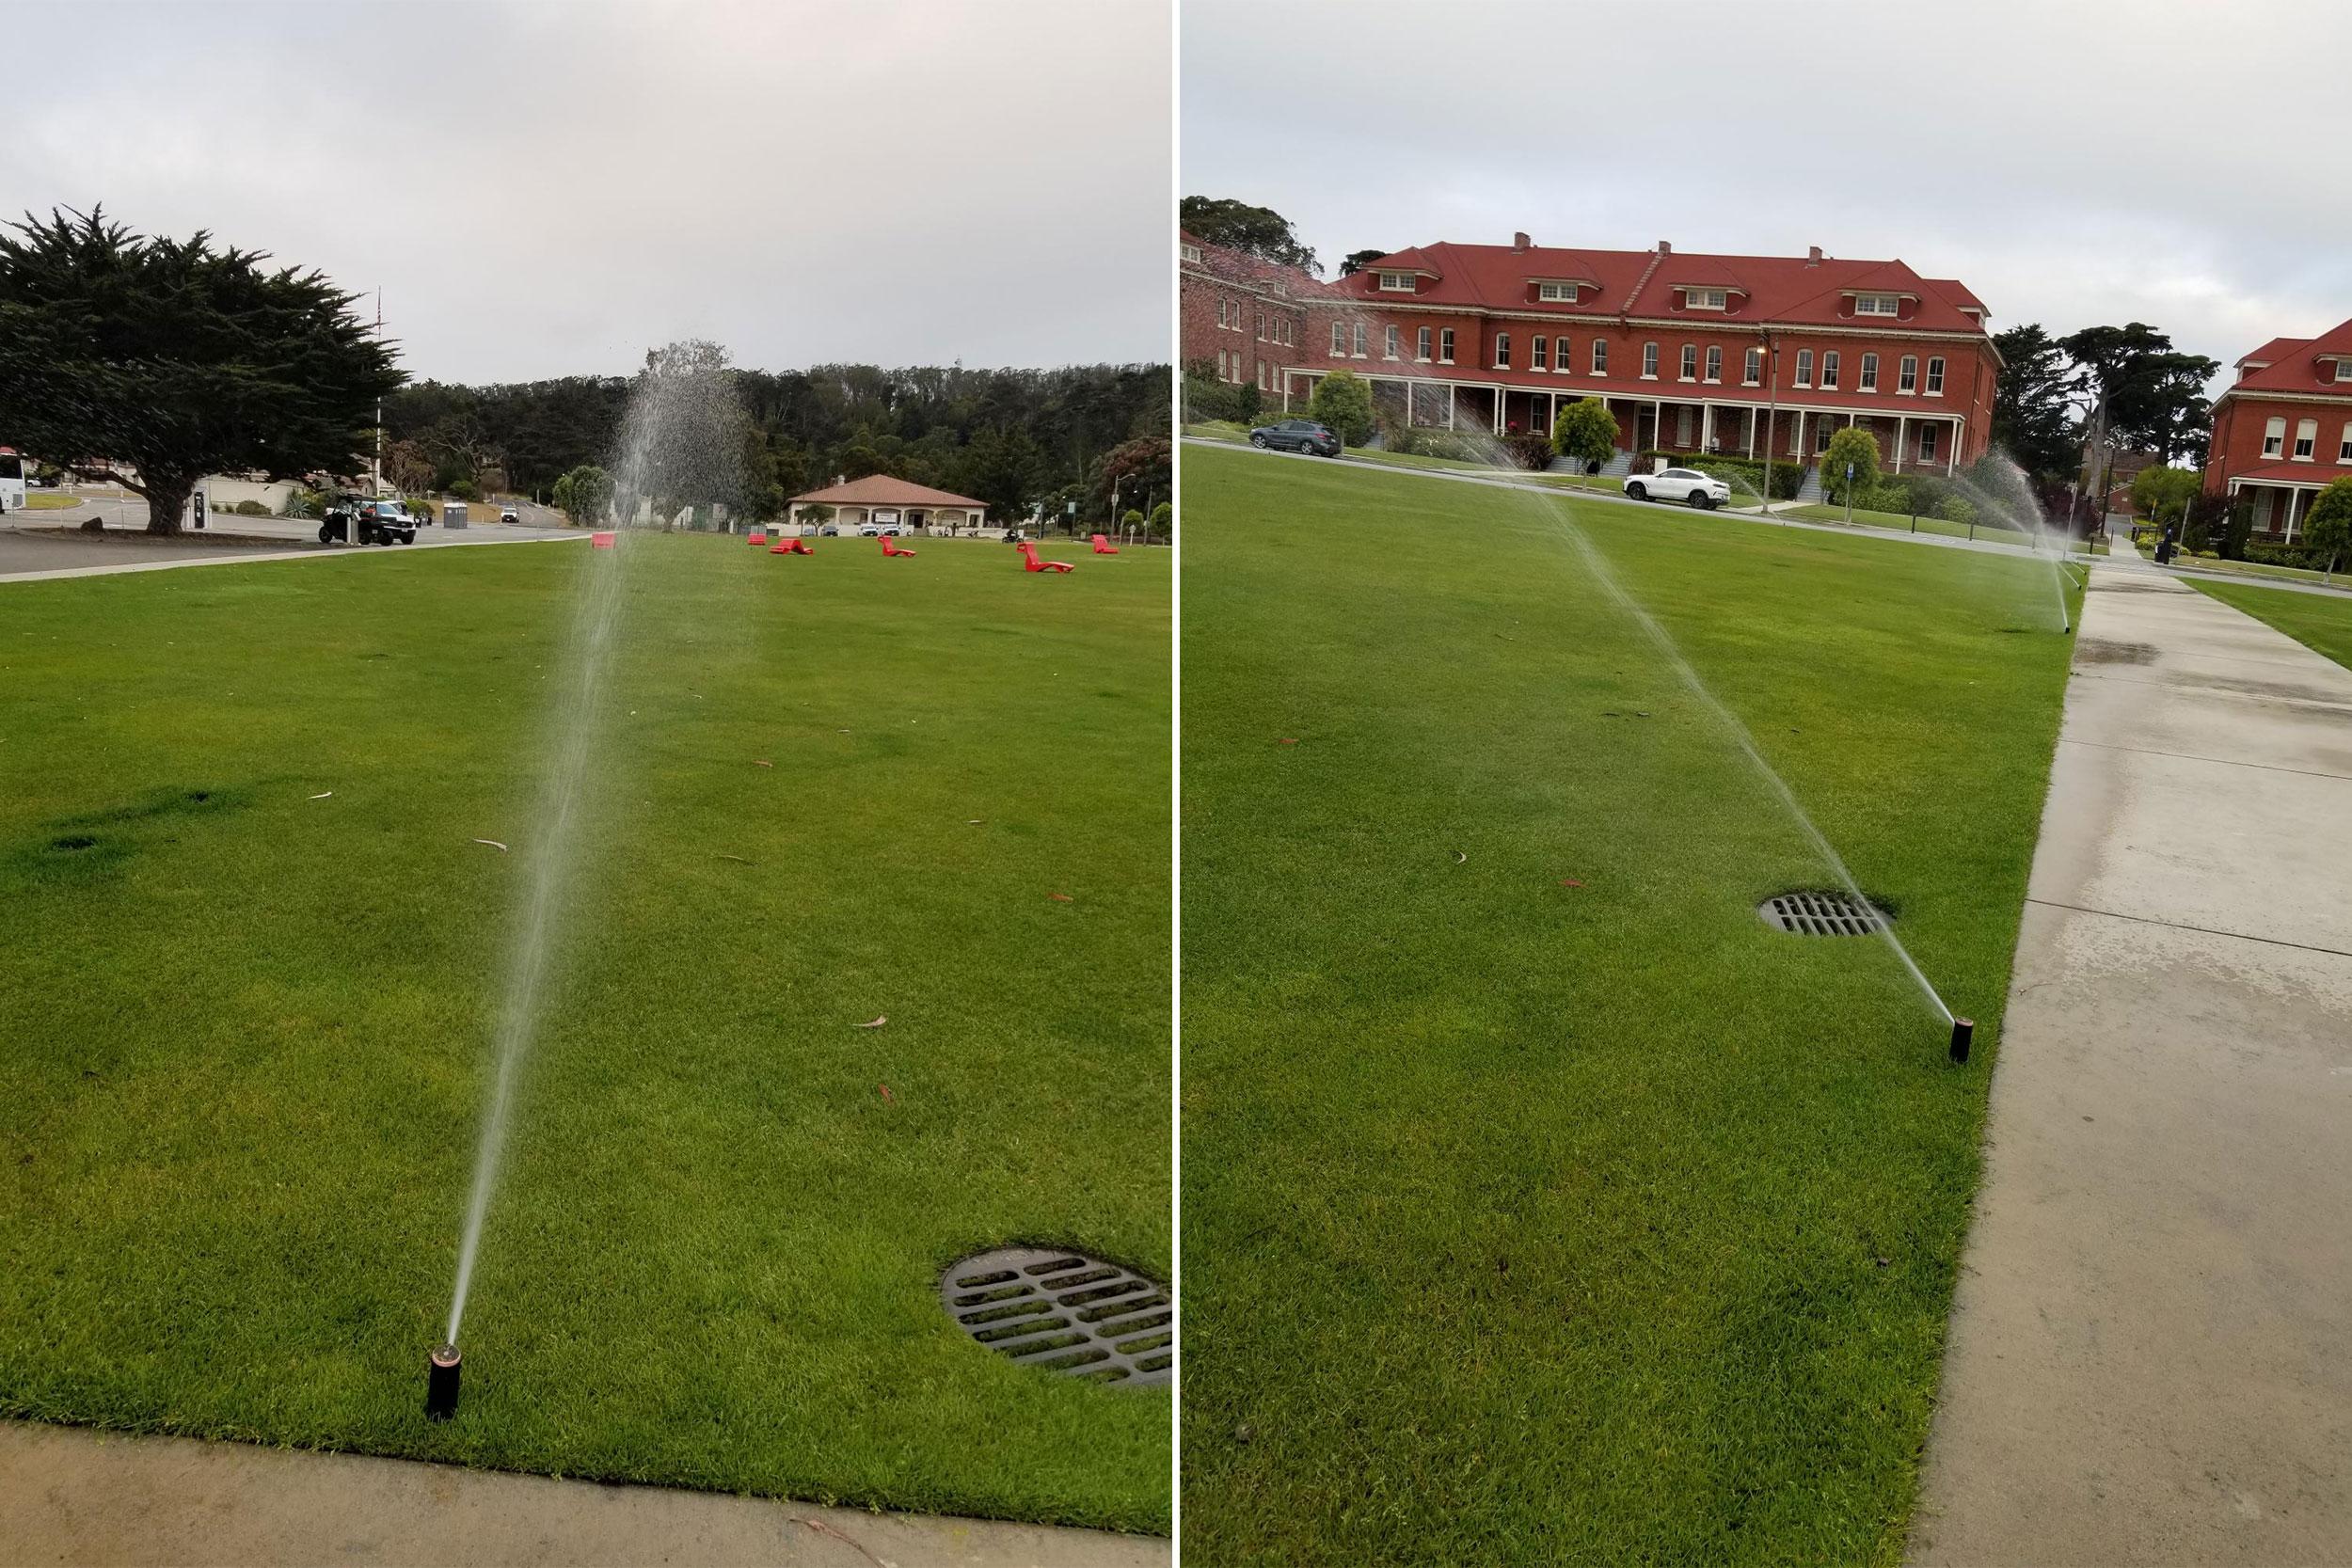 Sprinklers turned on on the Main Parade Lawn